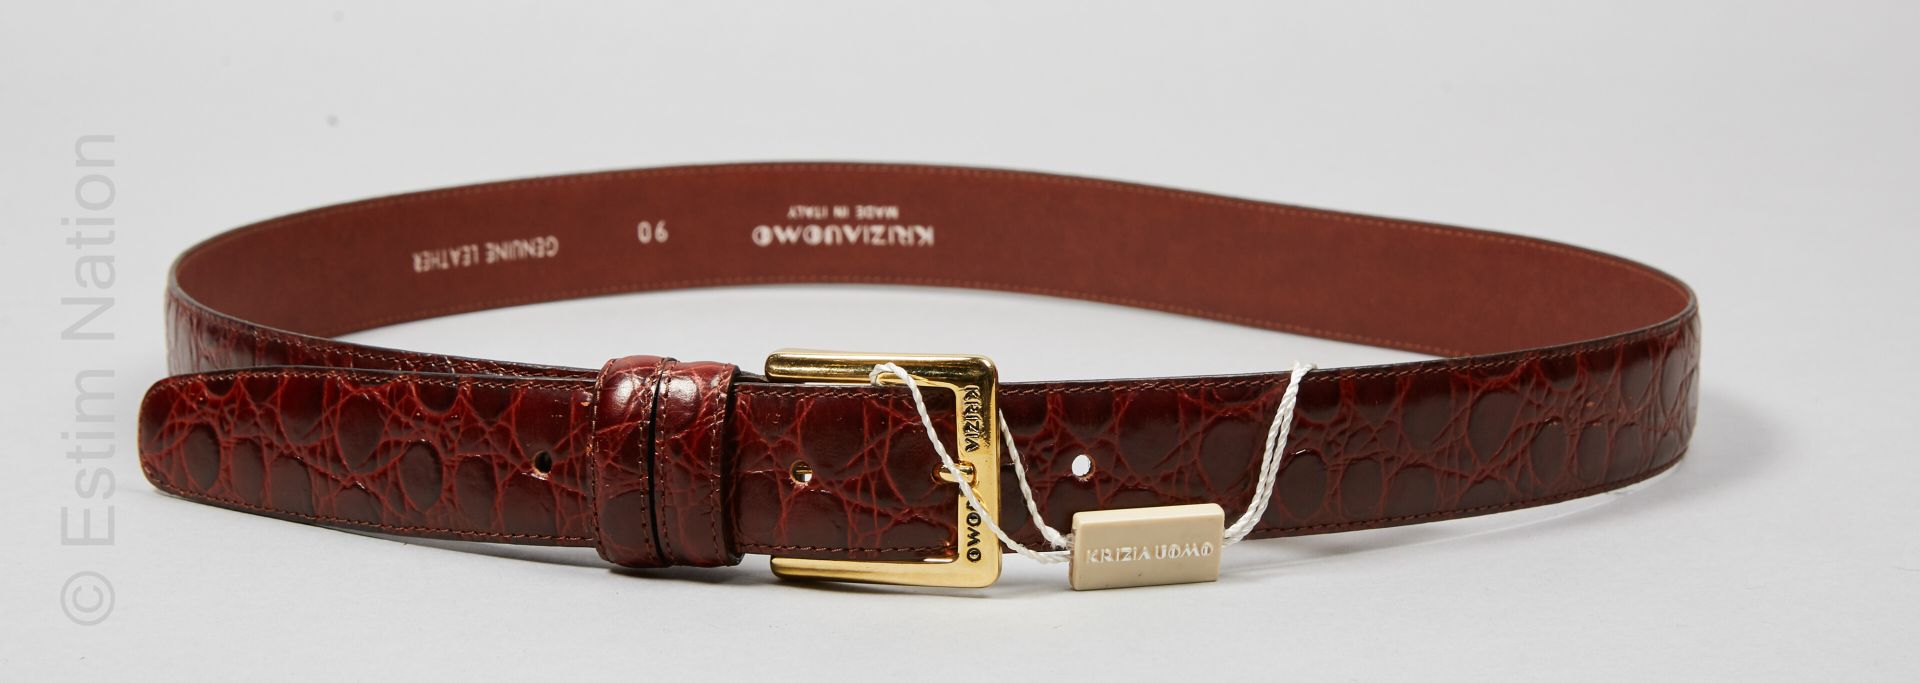 KRIZIA UOMO Cognac crocodile style leather BELT (S 90) (new condition with tags)&hellip;